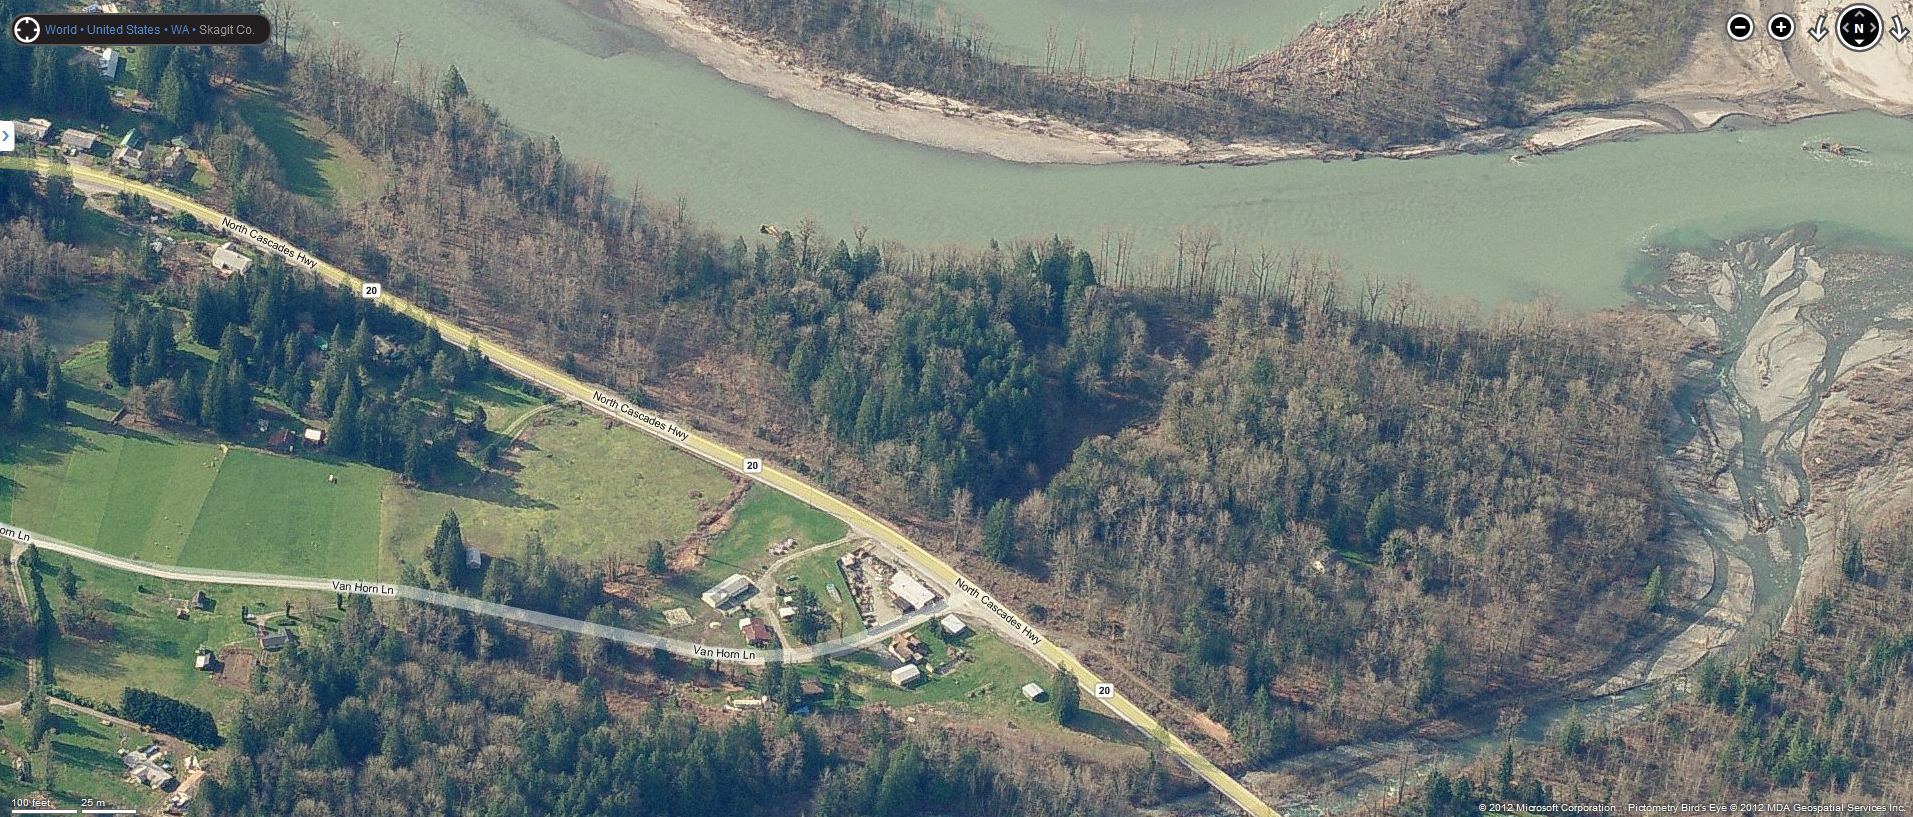 Aerial image of the confluence of Jackman Creek with the Skagit River. Credit unknown.